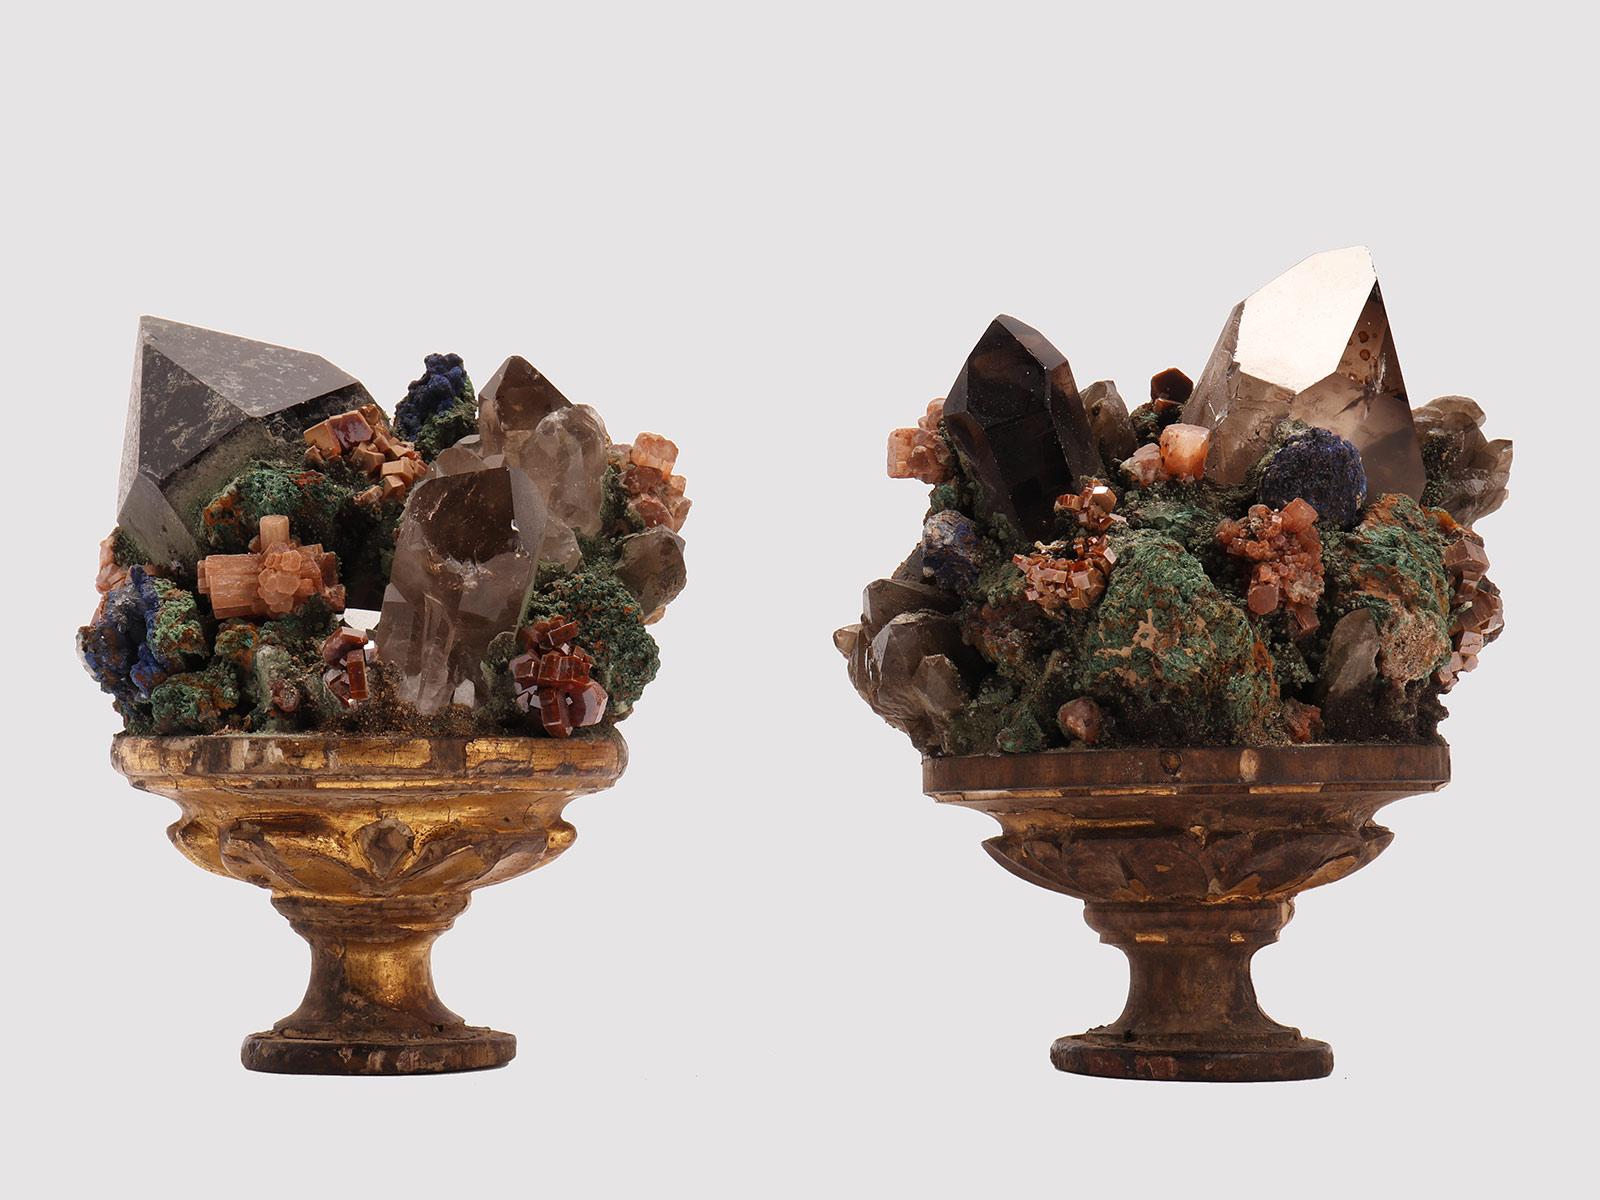 A pair of a naturalia mineral specimen. A composition with smoky quartz, vanadinite, malachite and native copper crystals, mounted over a gold plated wooden base with leaves. Italy circa 1880.